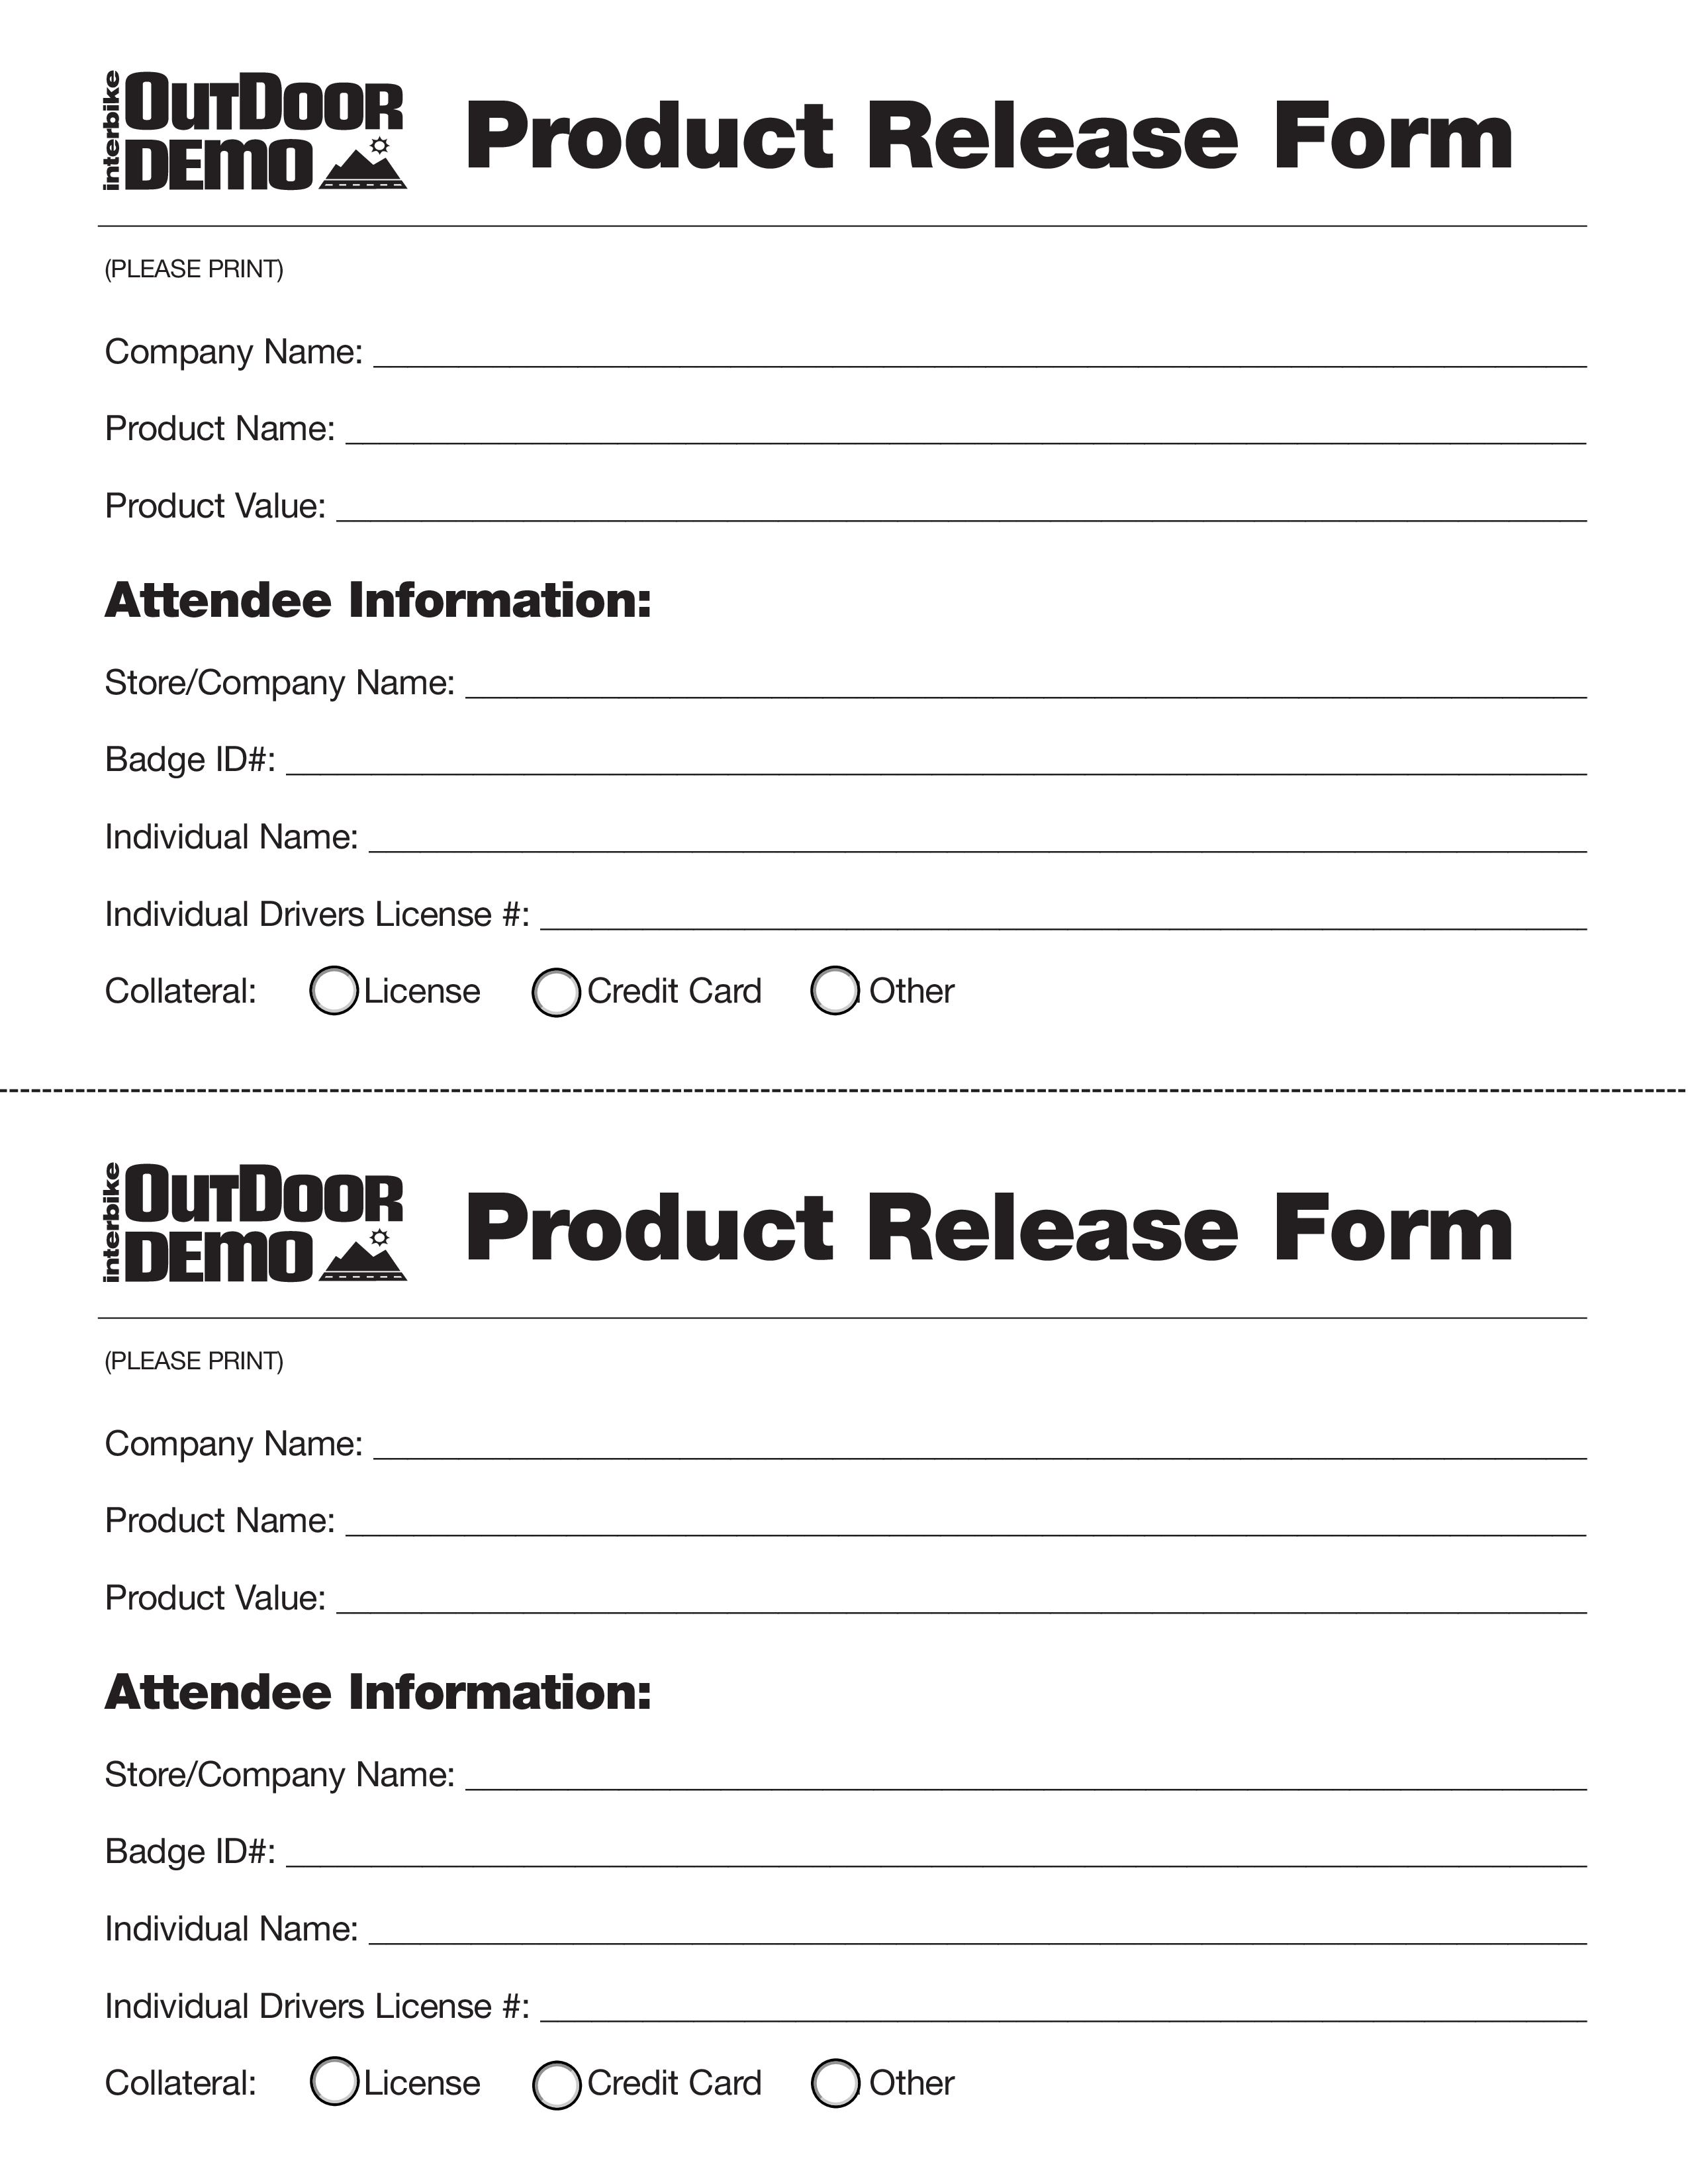 Product Release Form main image